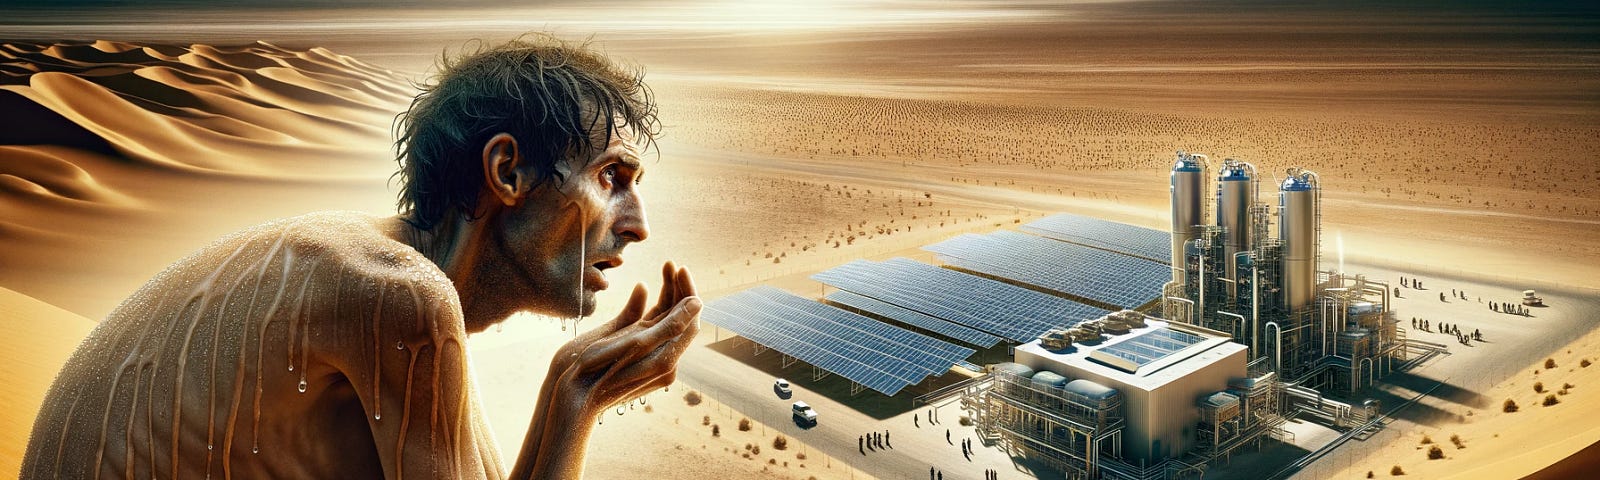 ChatGPT & DALL-E generated panoramic image featuring a dehydrated man staring at a green hydrogen facility in a desert.